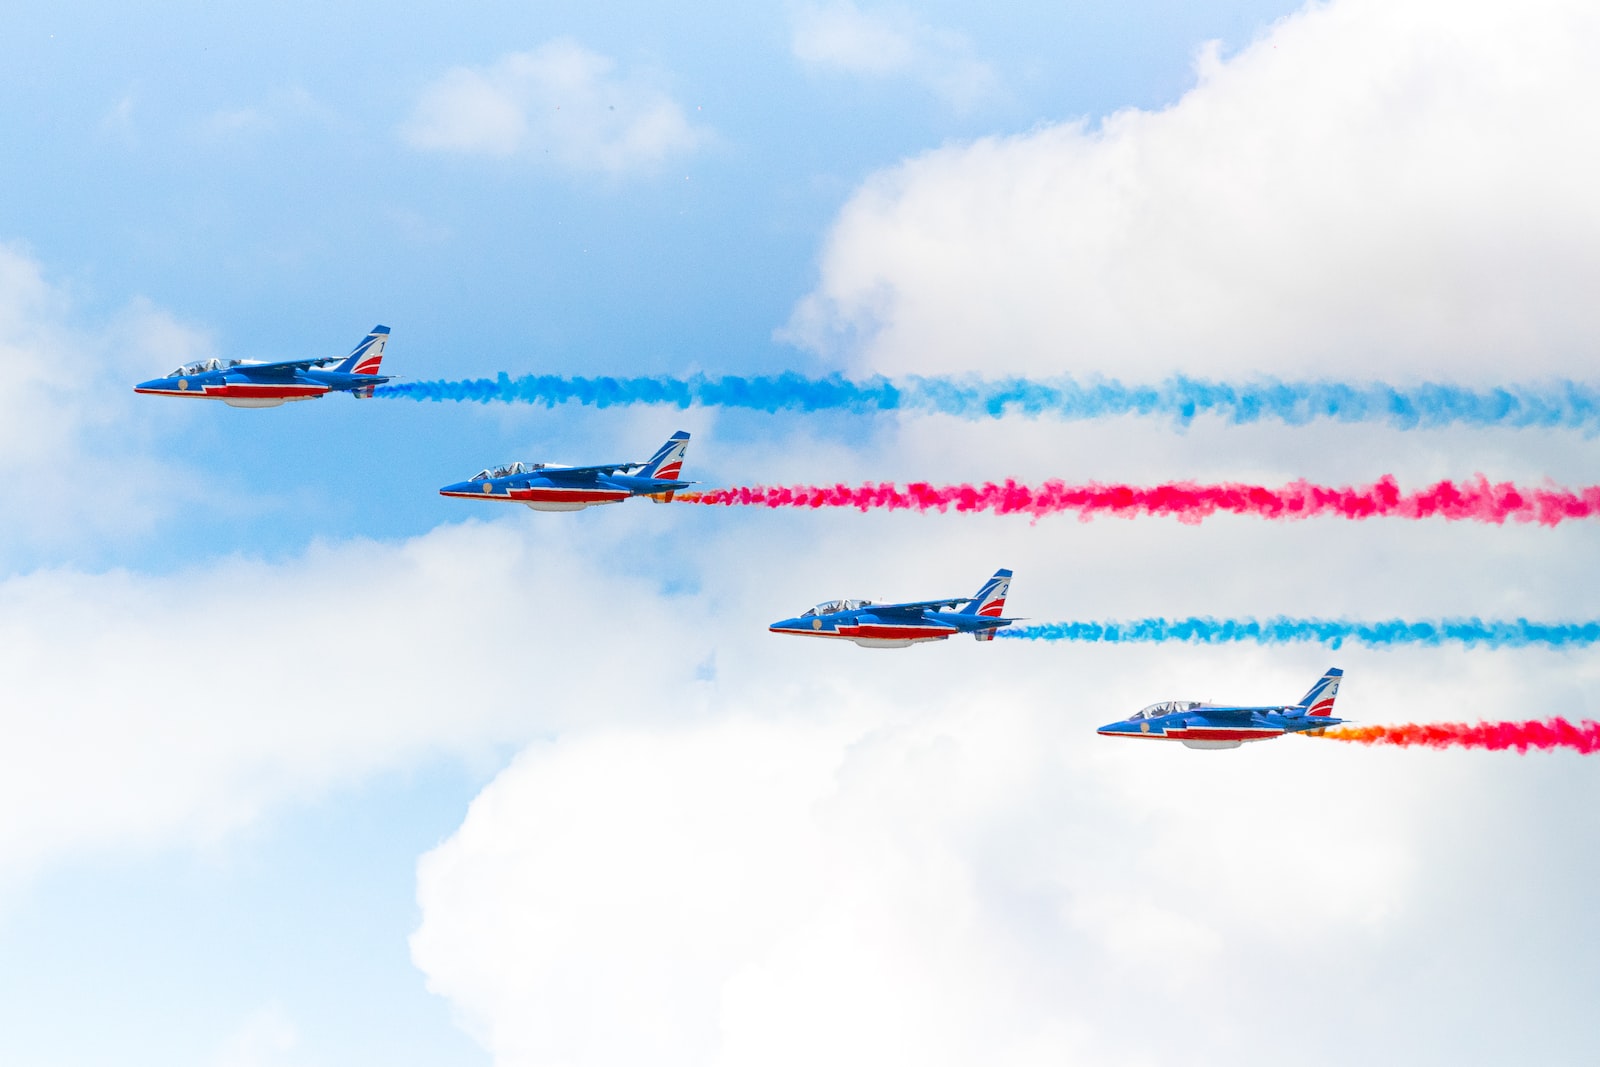 Aero India 2023: Bengaluru To Host The Biggest Air Show In South Asia